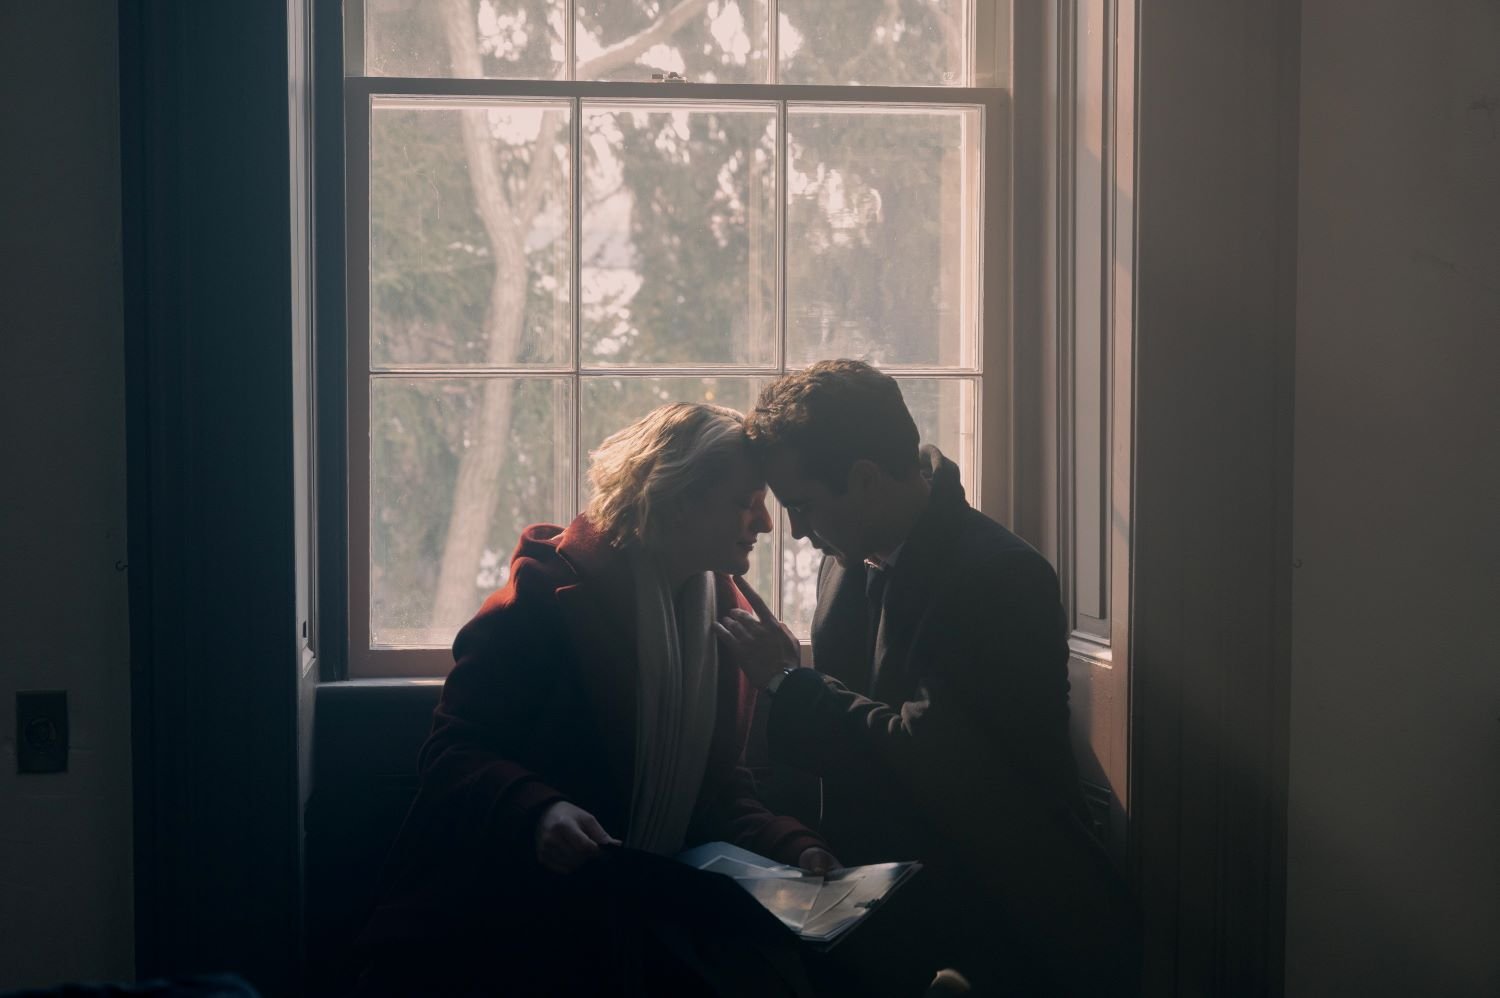 June and Nick touch foreheads while sitting on a window sill in 'The Handmaid's Tale' Season 4